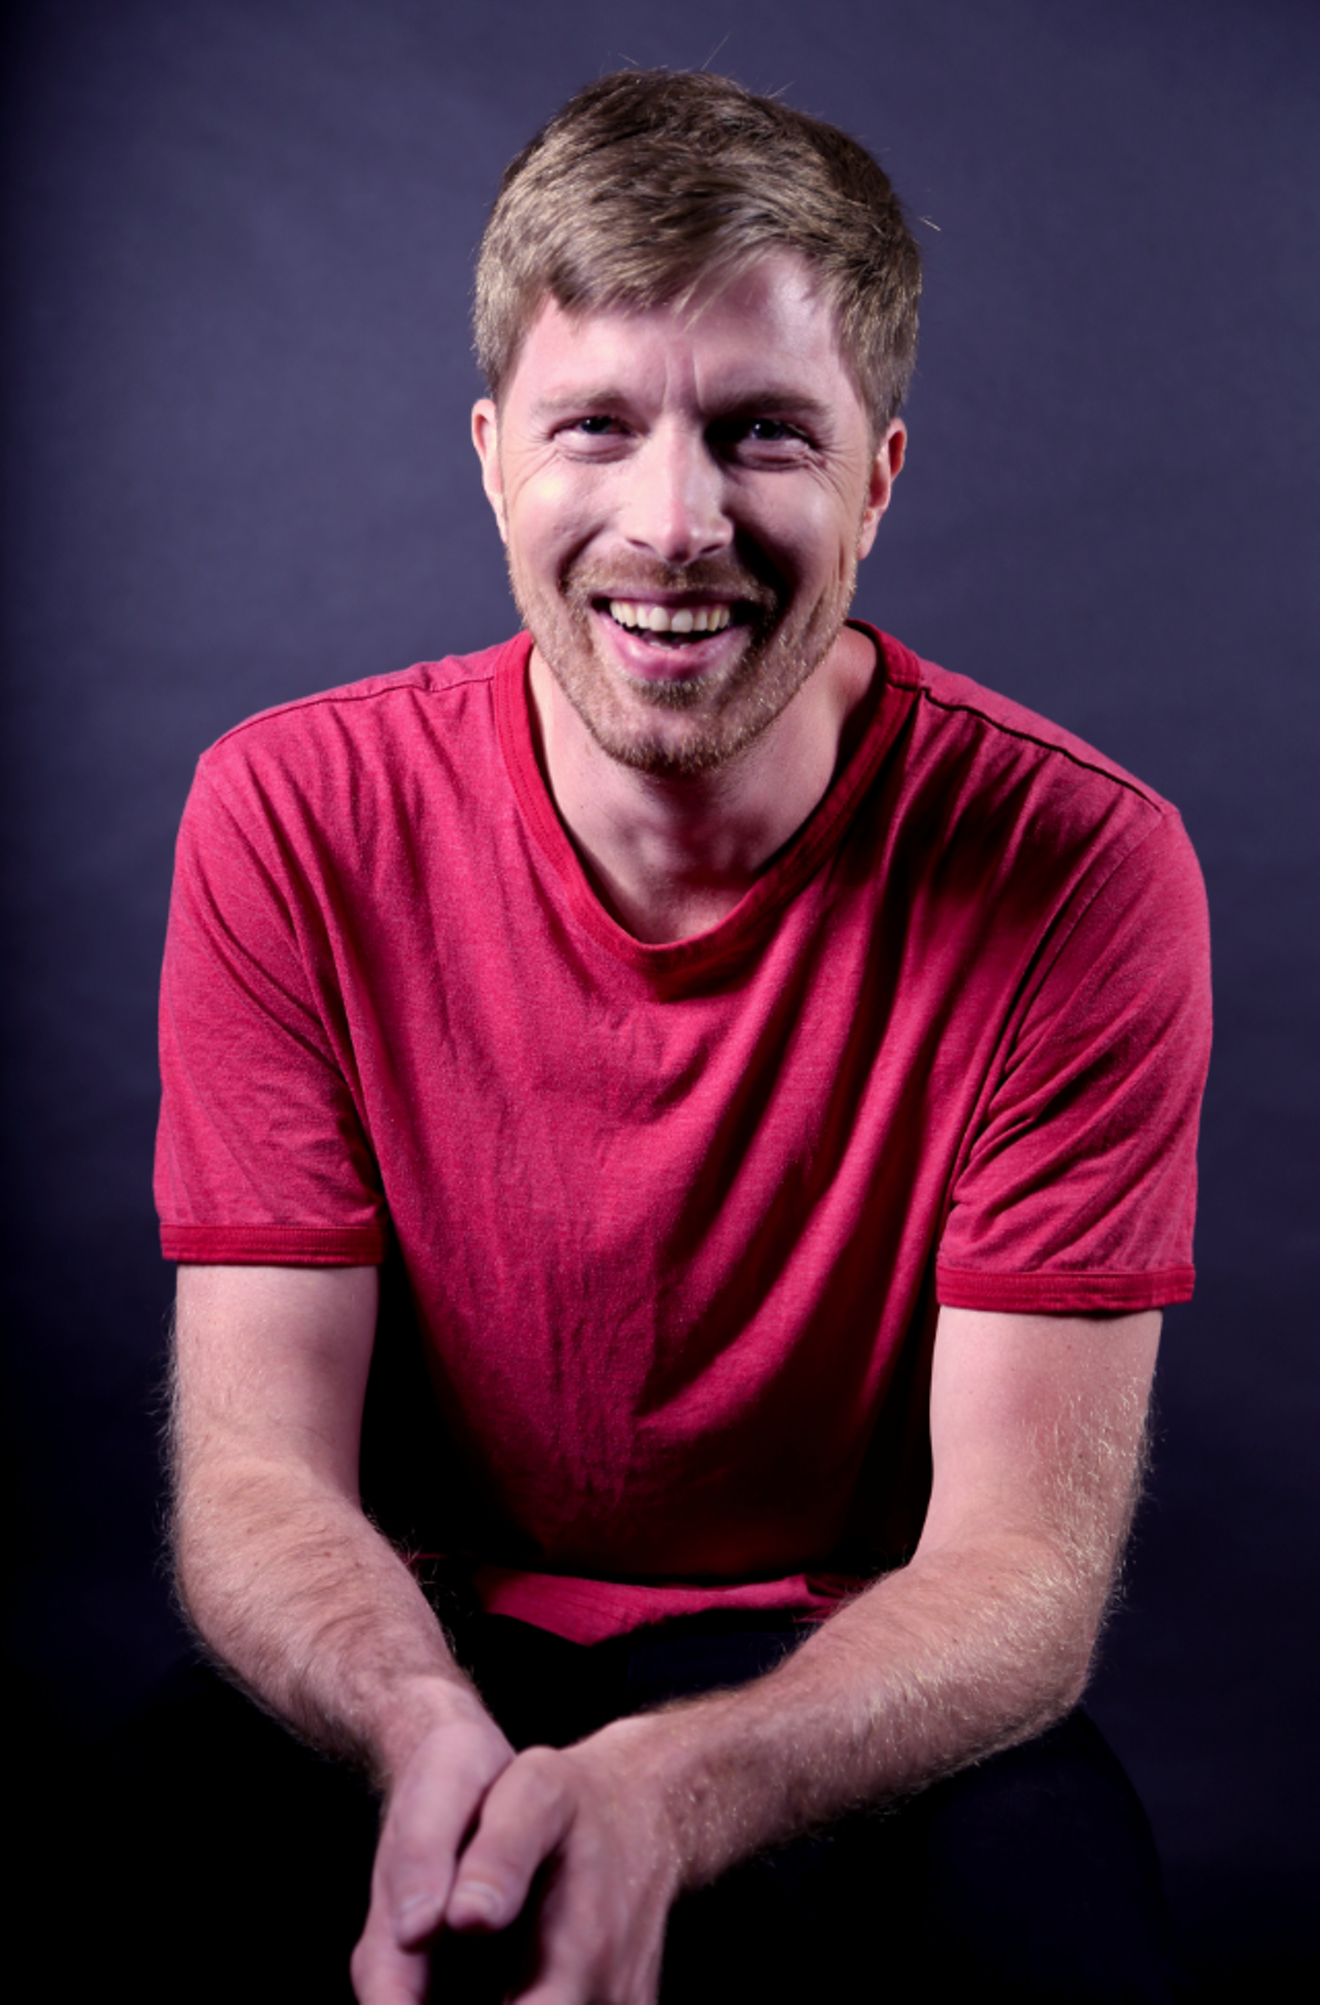 Shane Mauss is a comic and proponent for the medical potential of psychedelics.